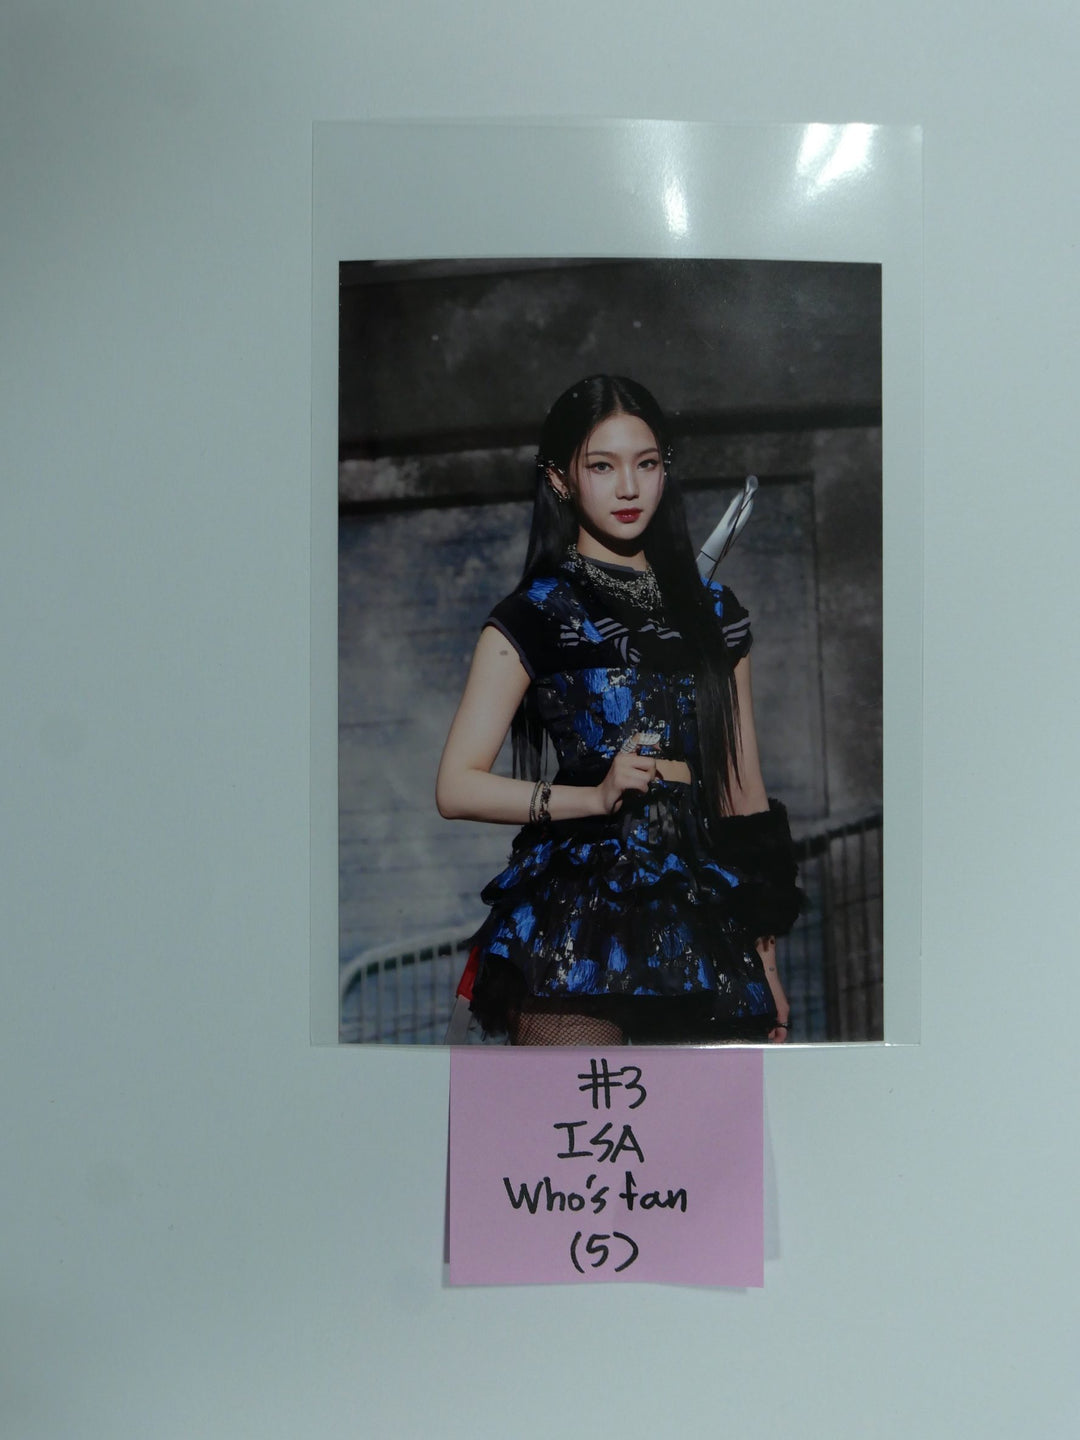 StayC 'YOUNG-LUV.COM' - Whos Fan Cafe Luckydraw Event PVC Photocard, 4 x 6 Photo